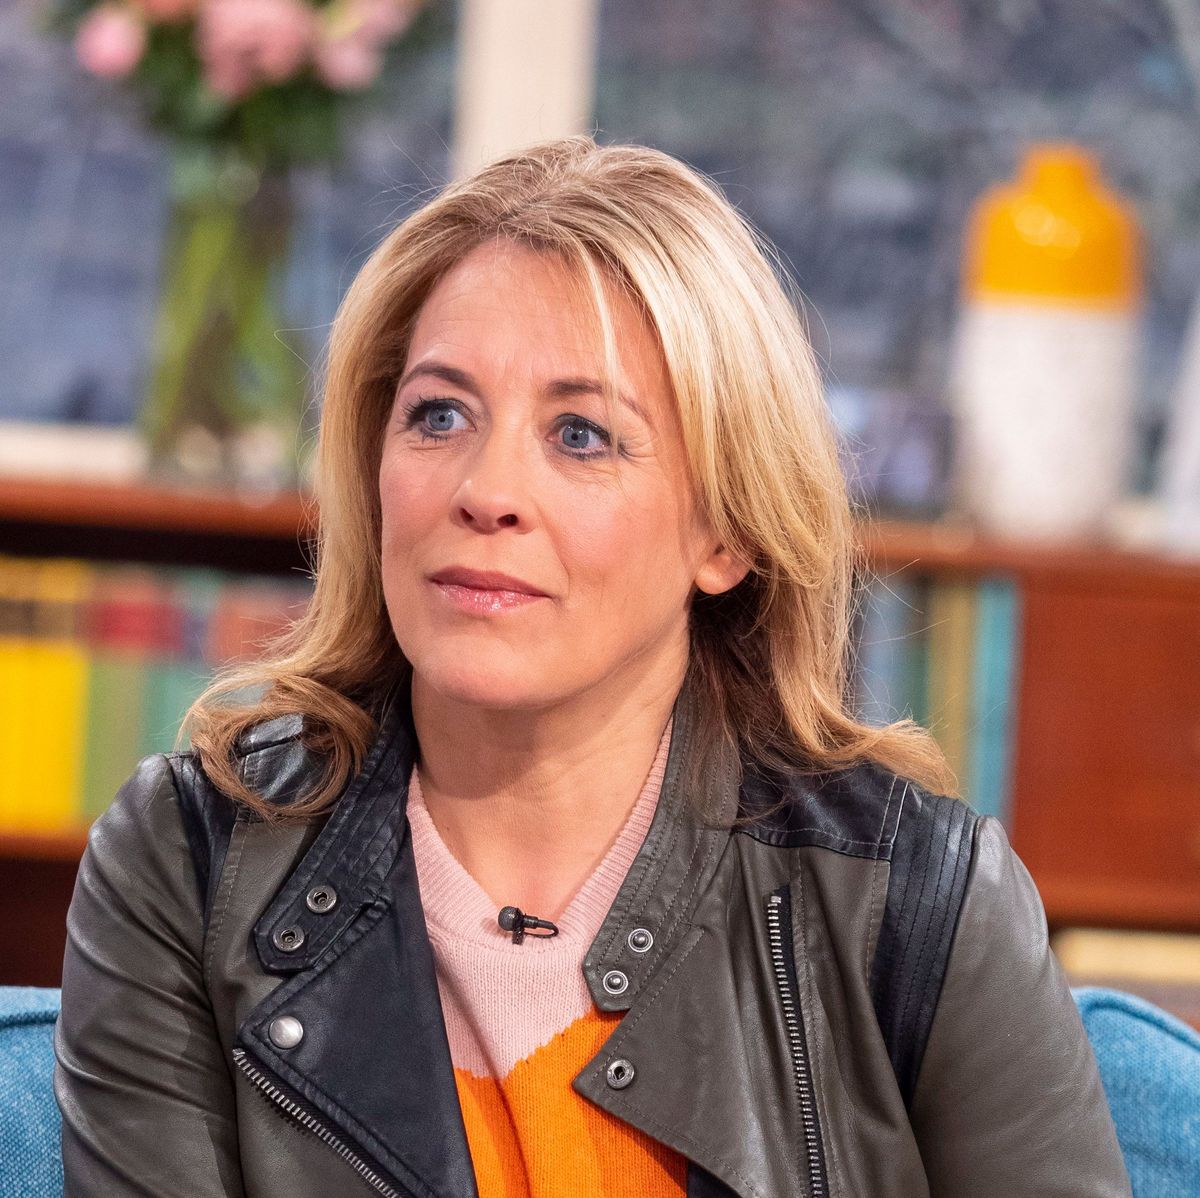 Property Ladder Presenter Sarah Beeny Has Breast Cancer